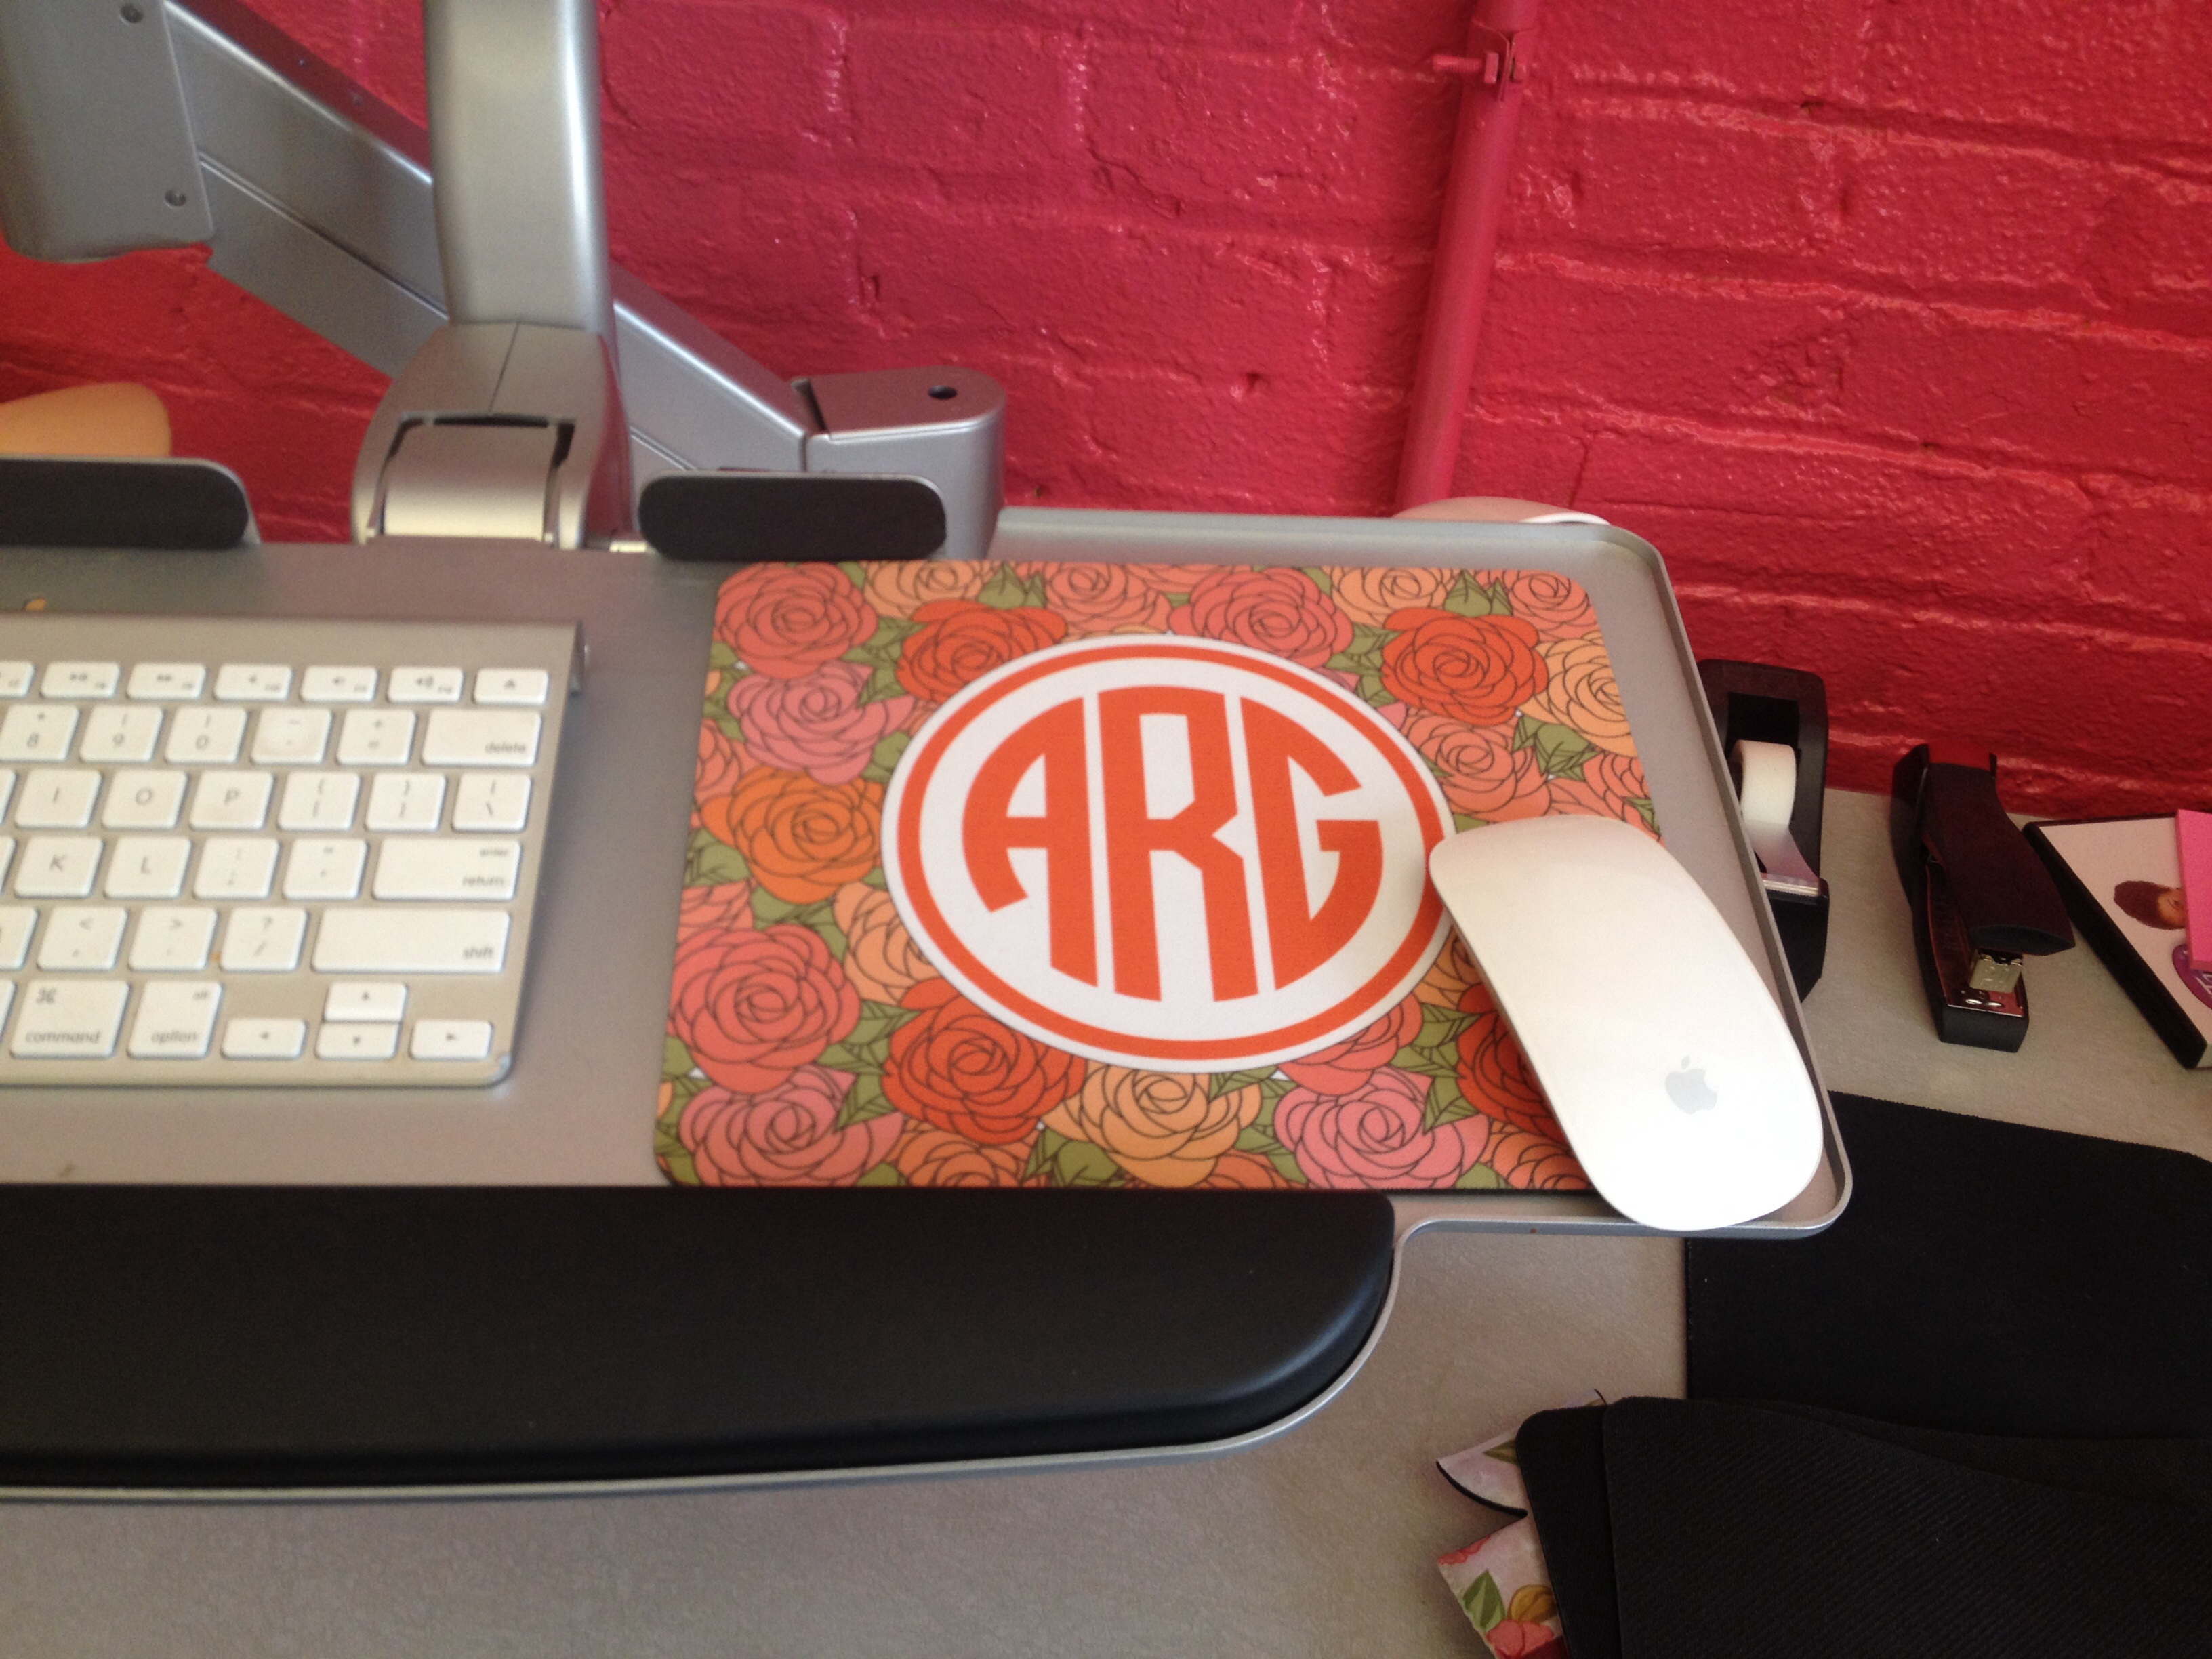 Mousepads made with sublimation printing